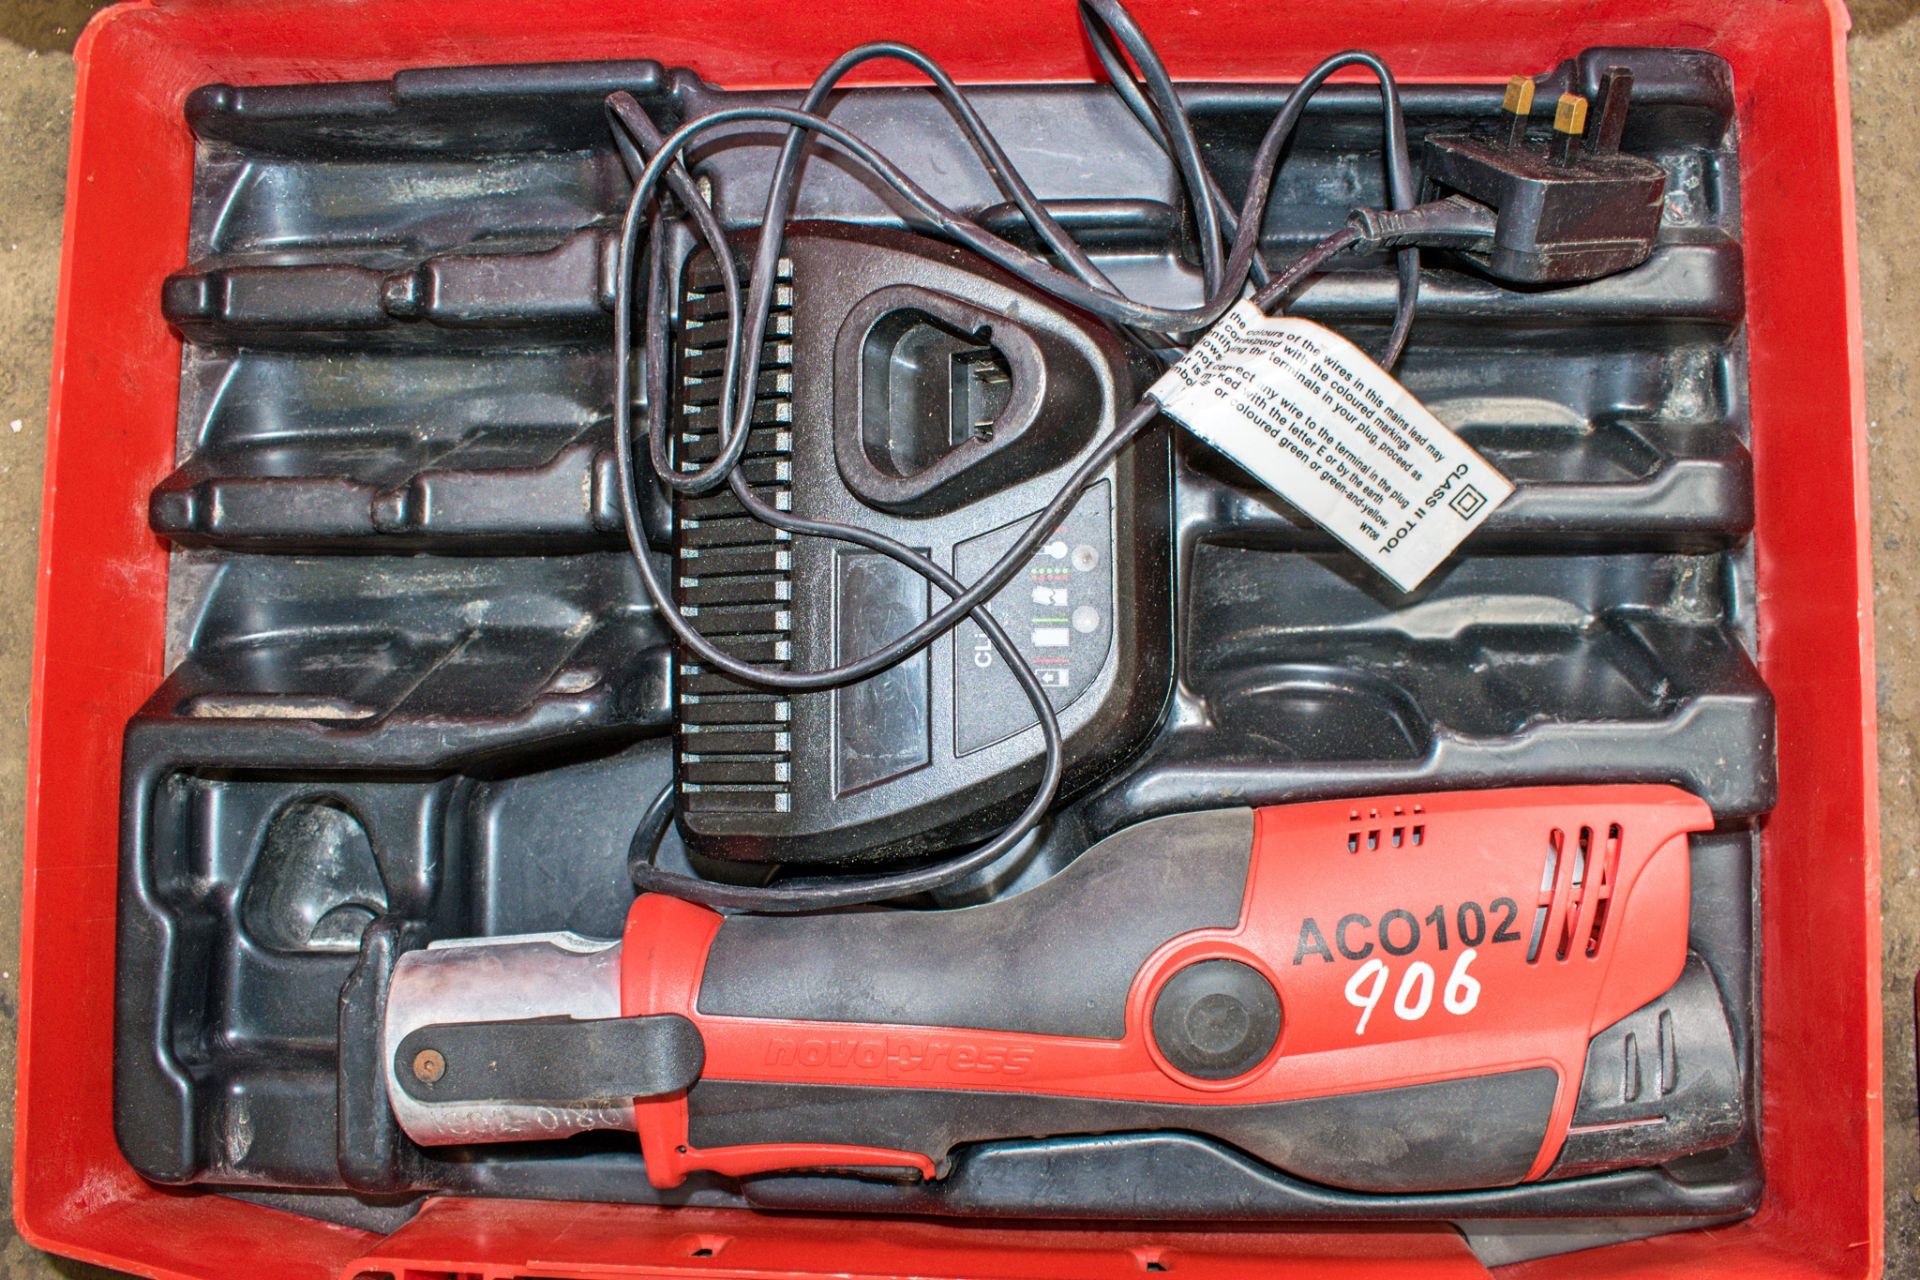 Novopress cordless pipe crimping tool c/w battery, charger & carry case